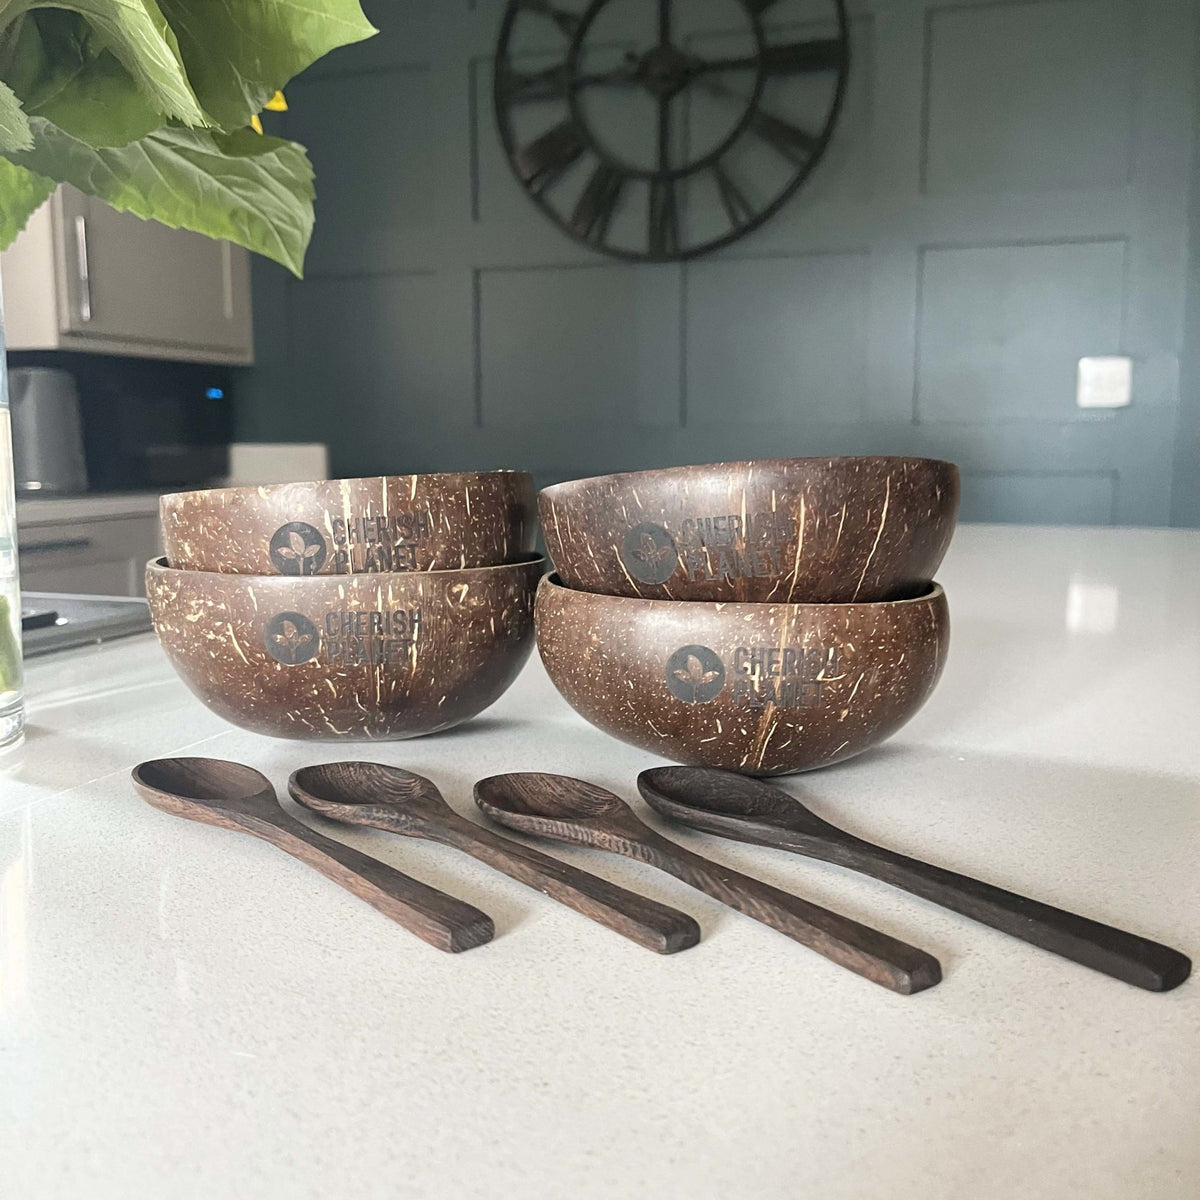 Real Coconut Shell Brown Bowls with Wooden Spoons Set